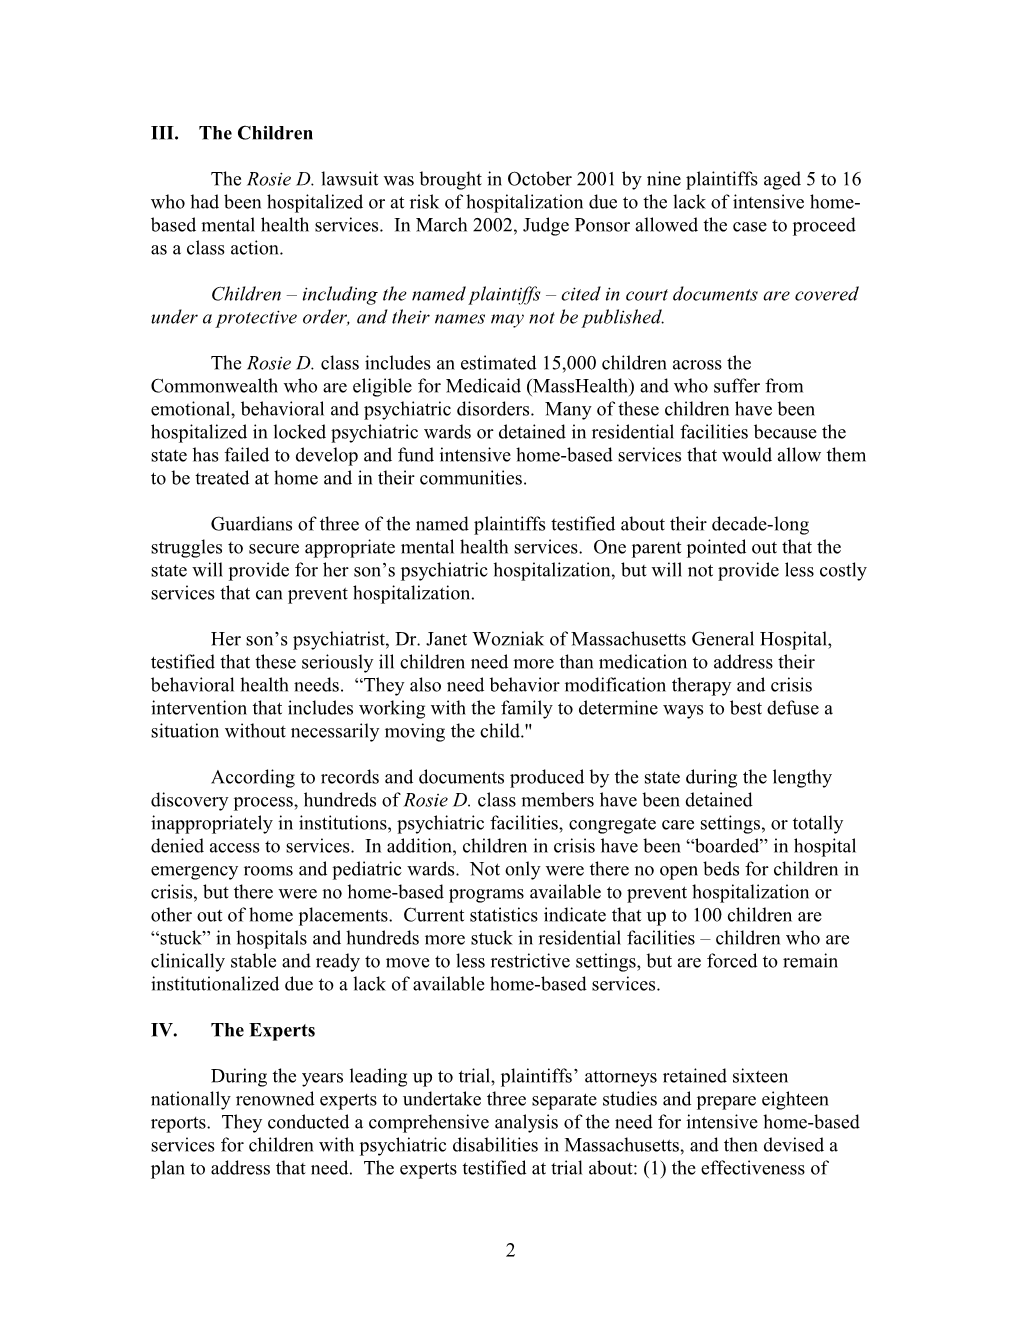 Overview of the Case and Summary of the Trial in Rosie D. V. Romney